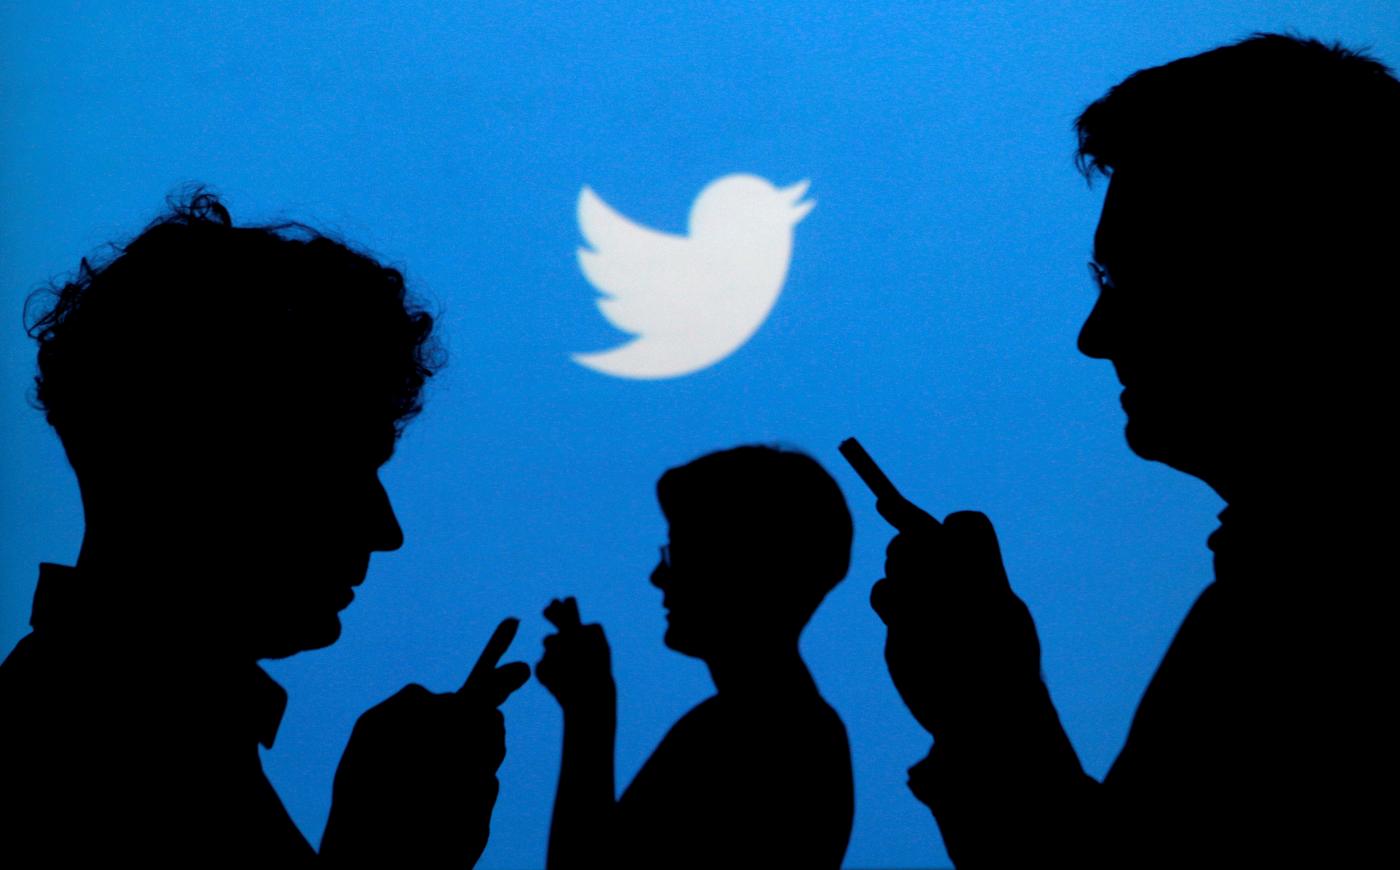 People hold mobile phones against a backdrop projected with the Twitter logo (Reuters)